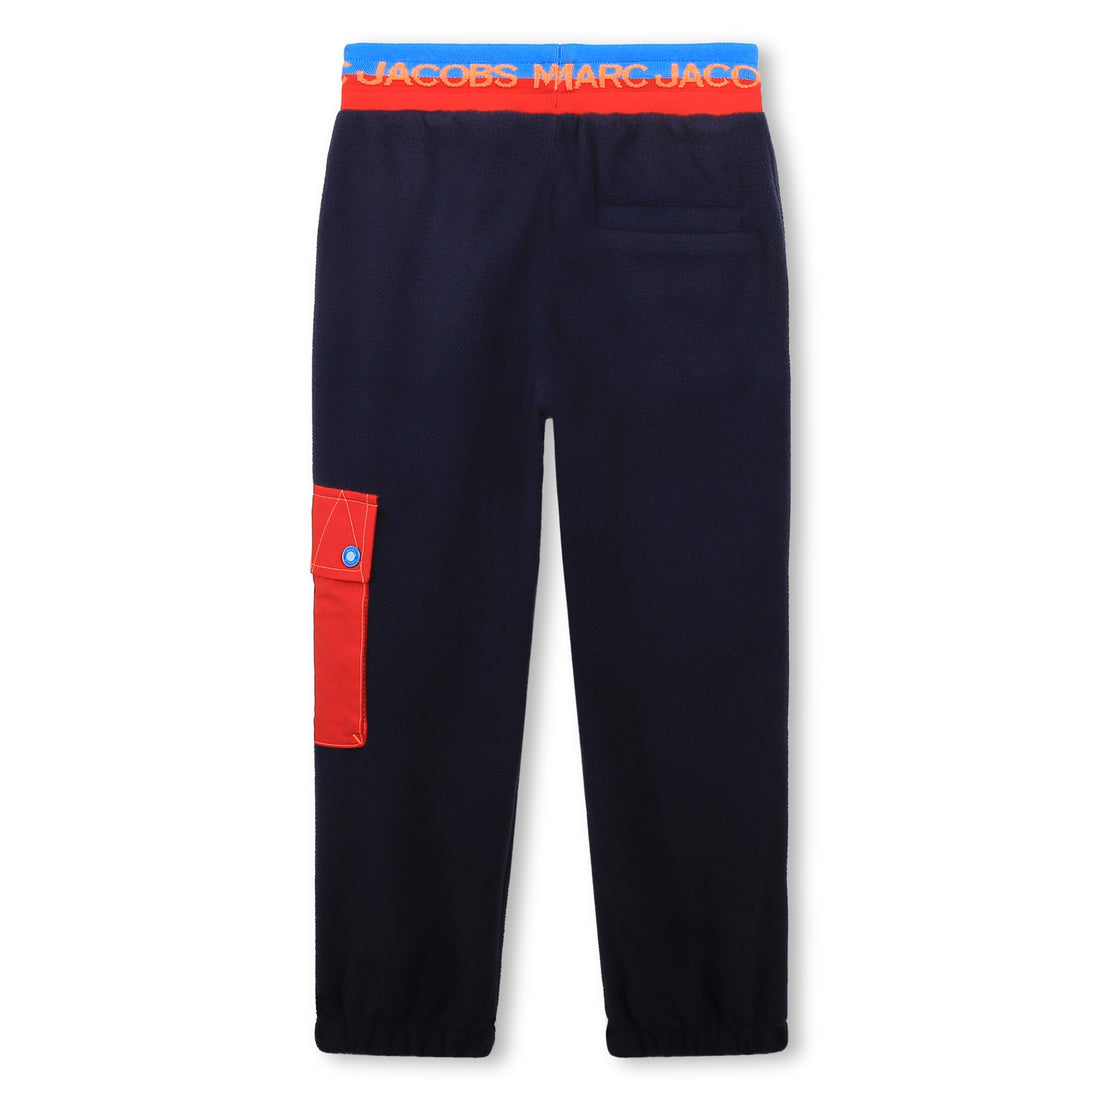 The Marc Jacobs Jogging Bottoms Style: W24293